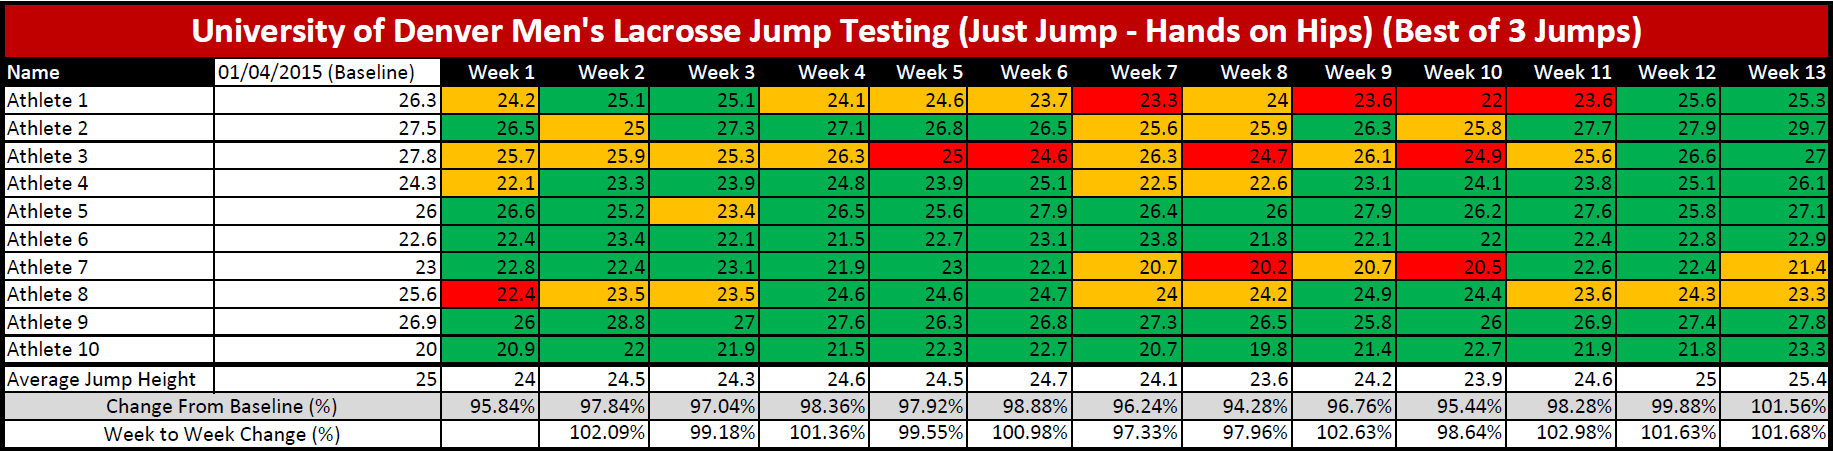 Changes_in_Weekly_Jump_Height_for_ten_athletes.png